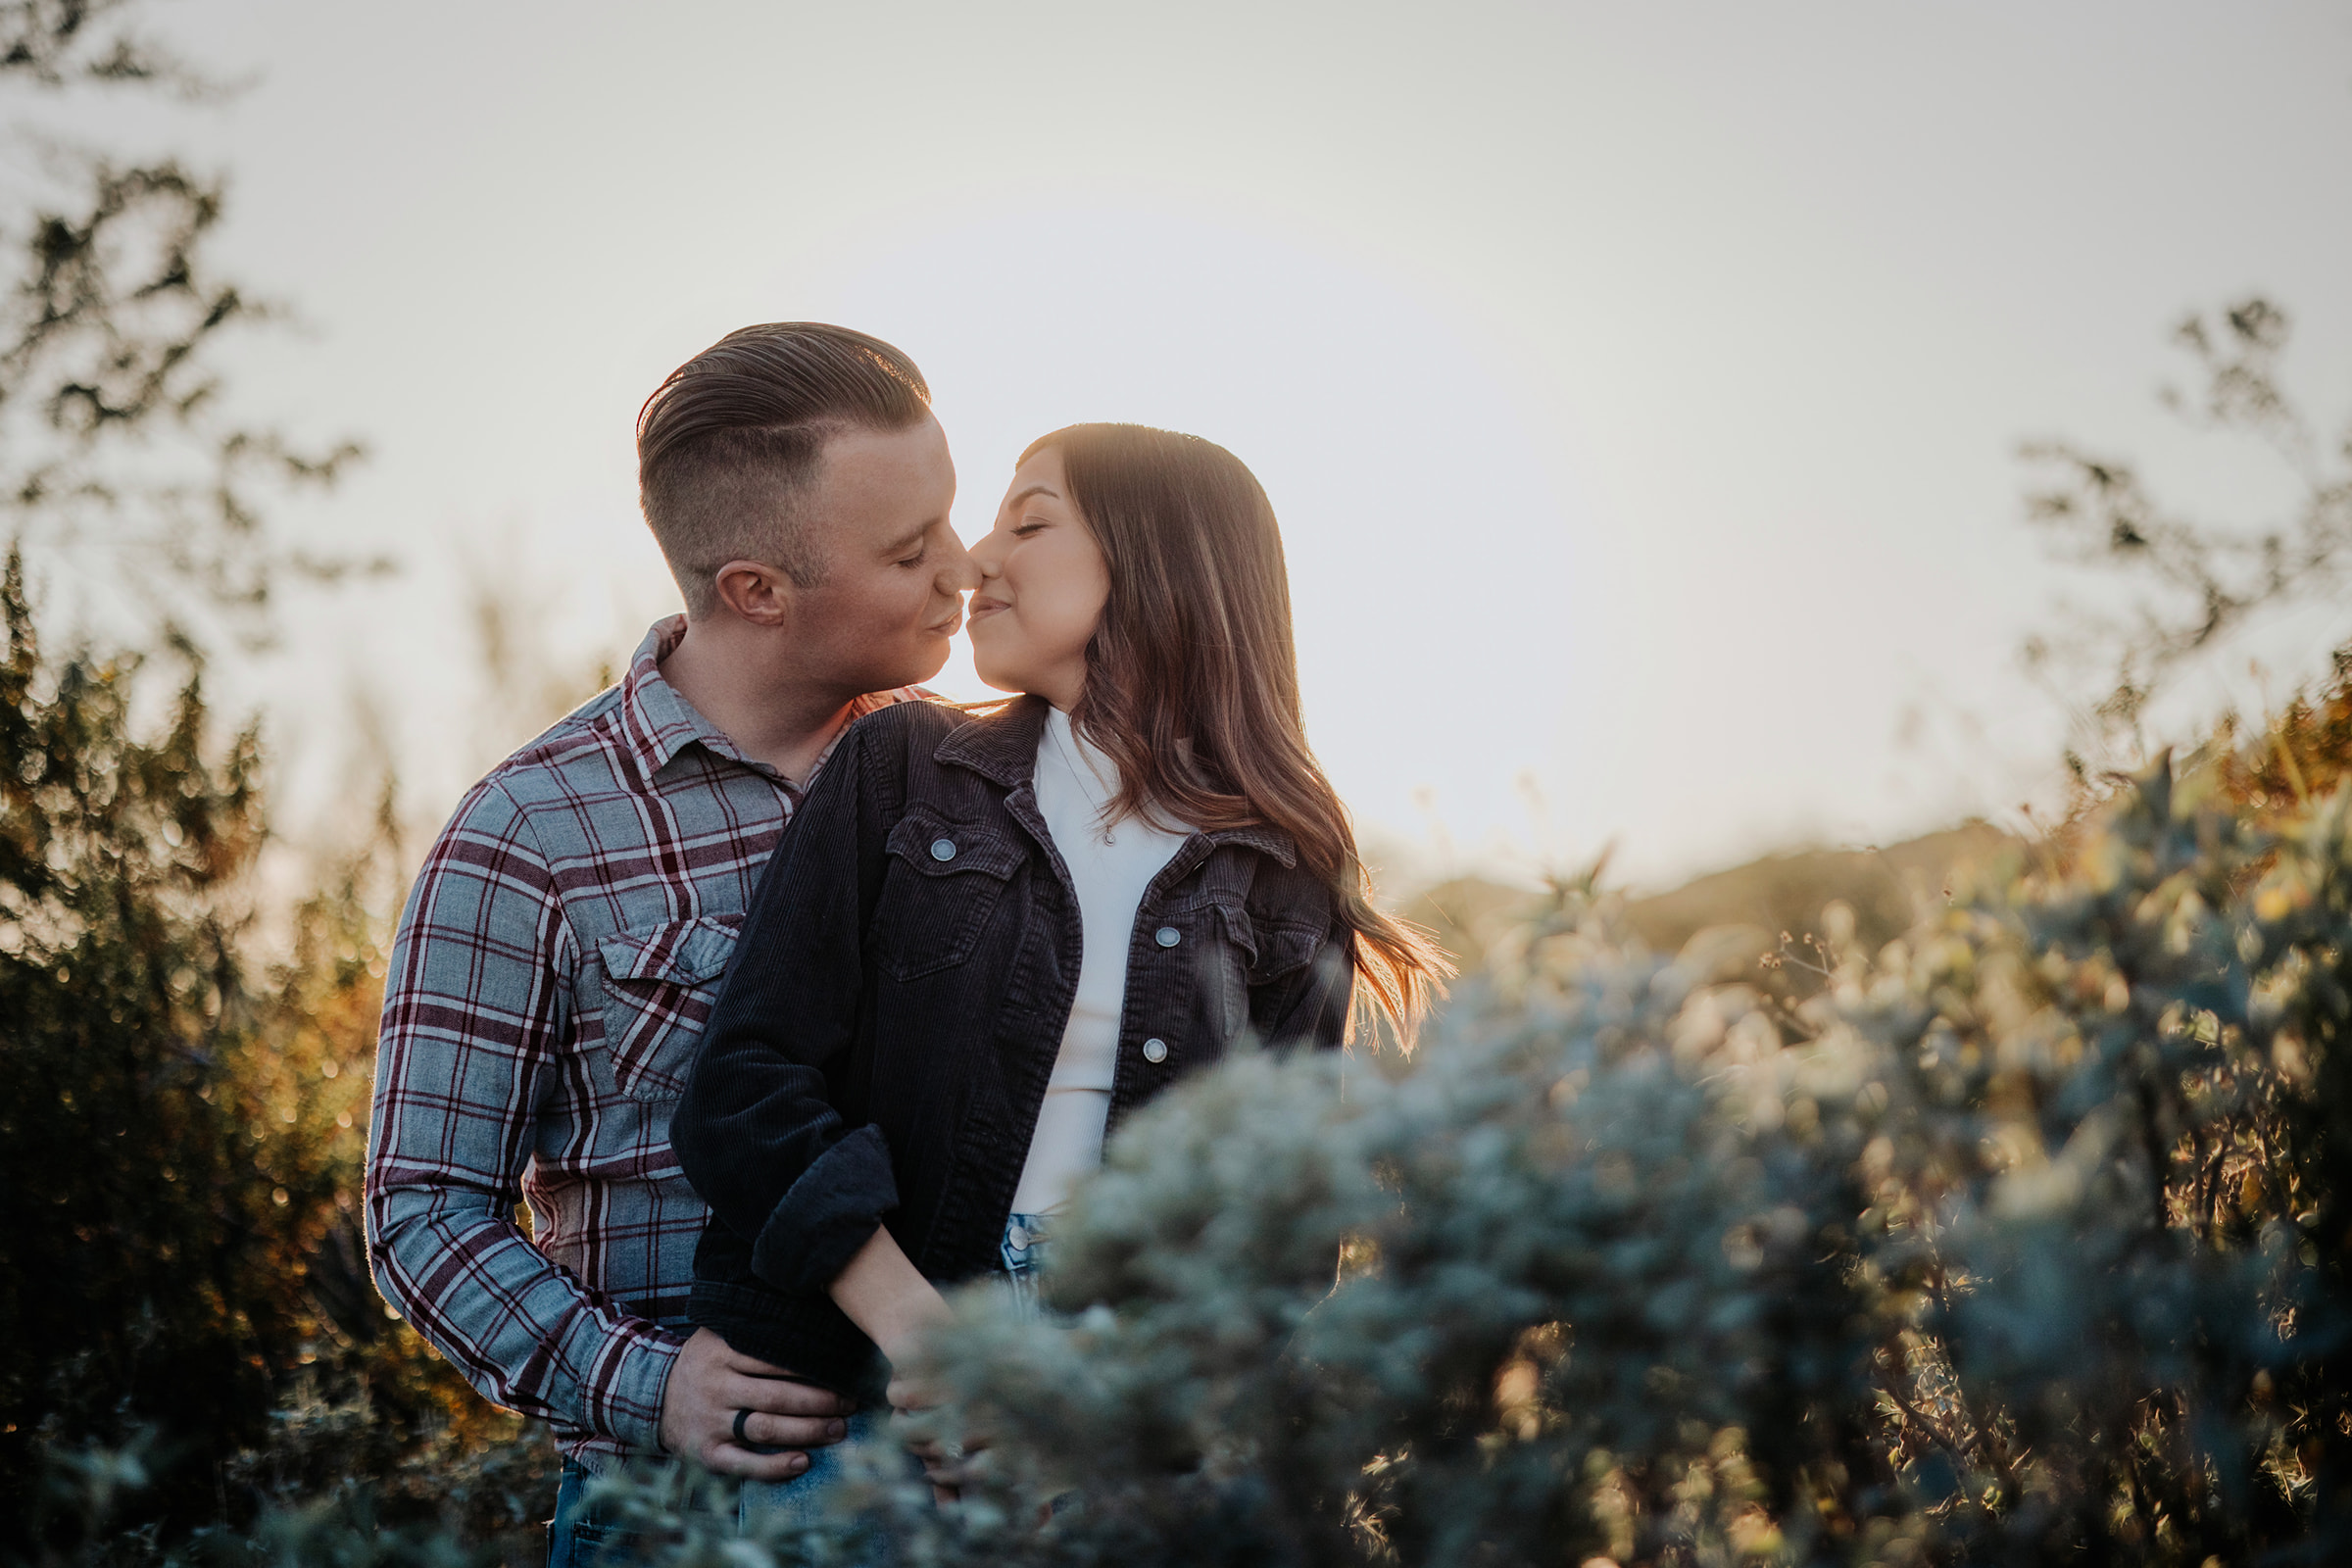 Wedding Engagement Session at sunset while Kissing